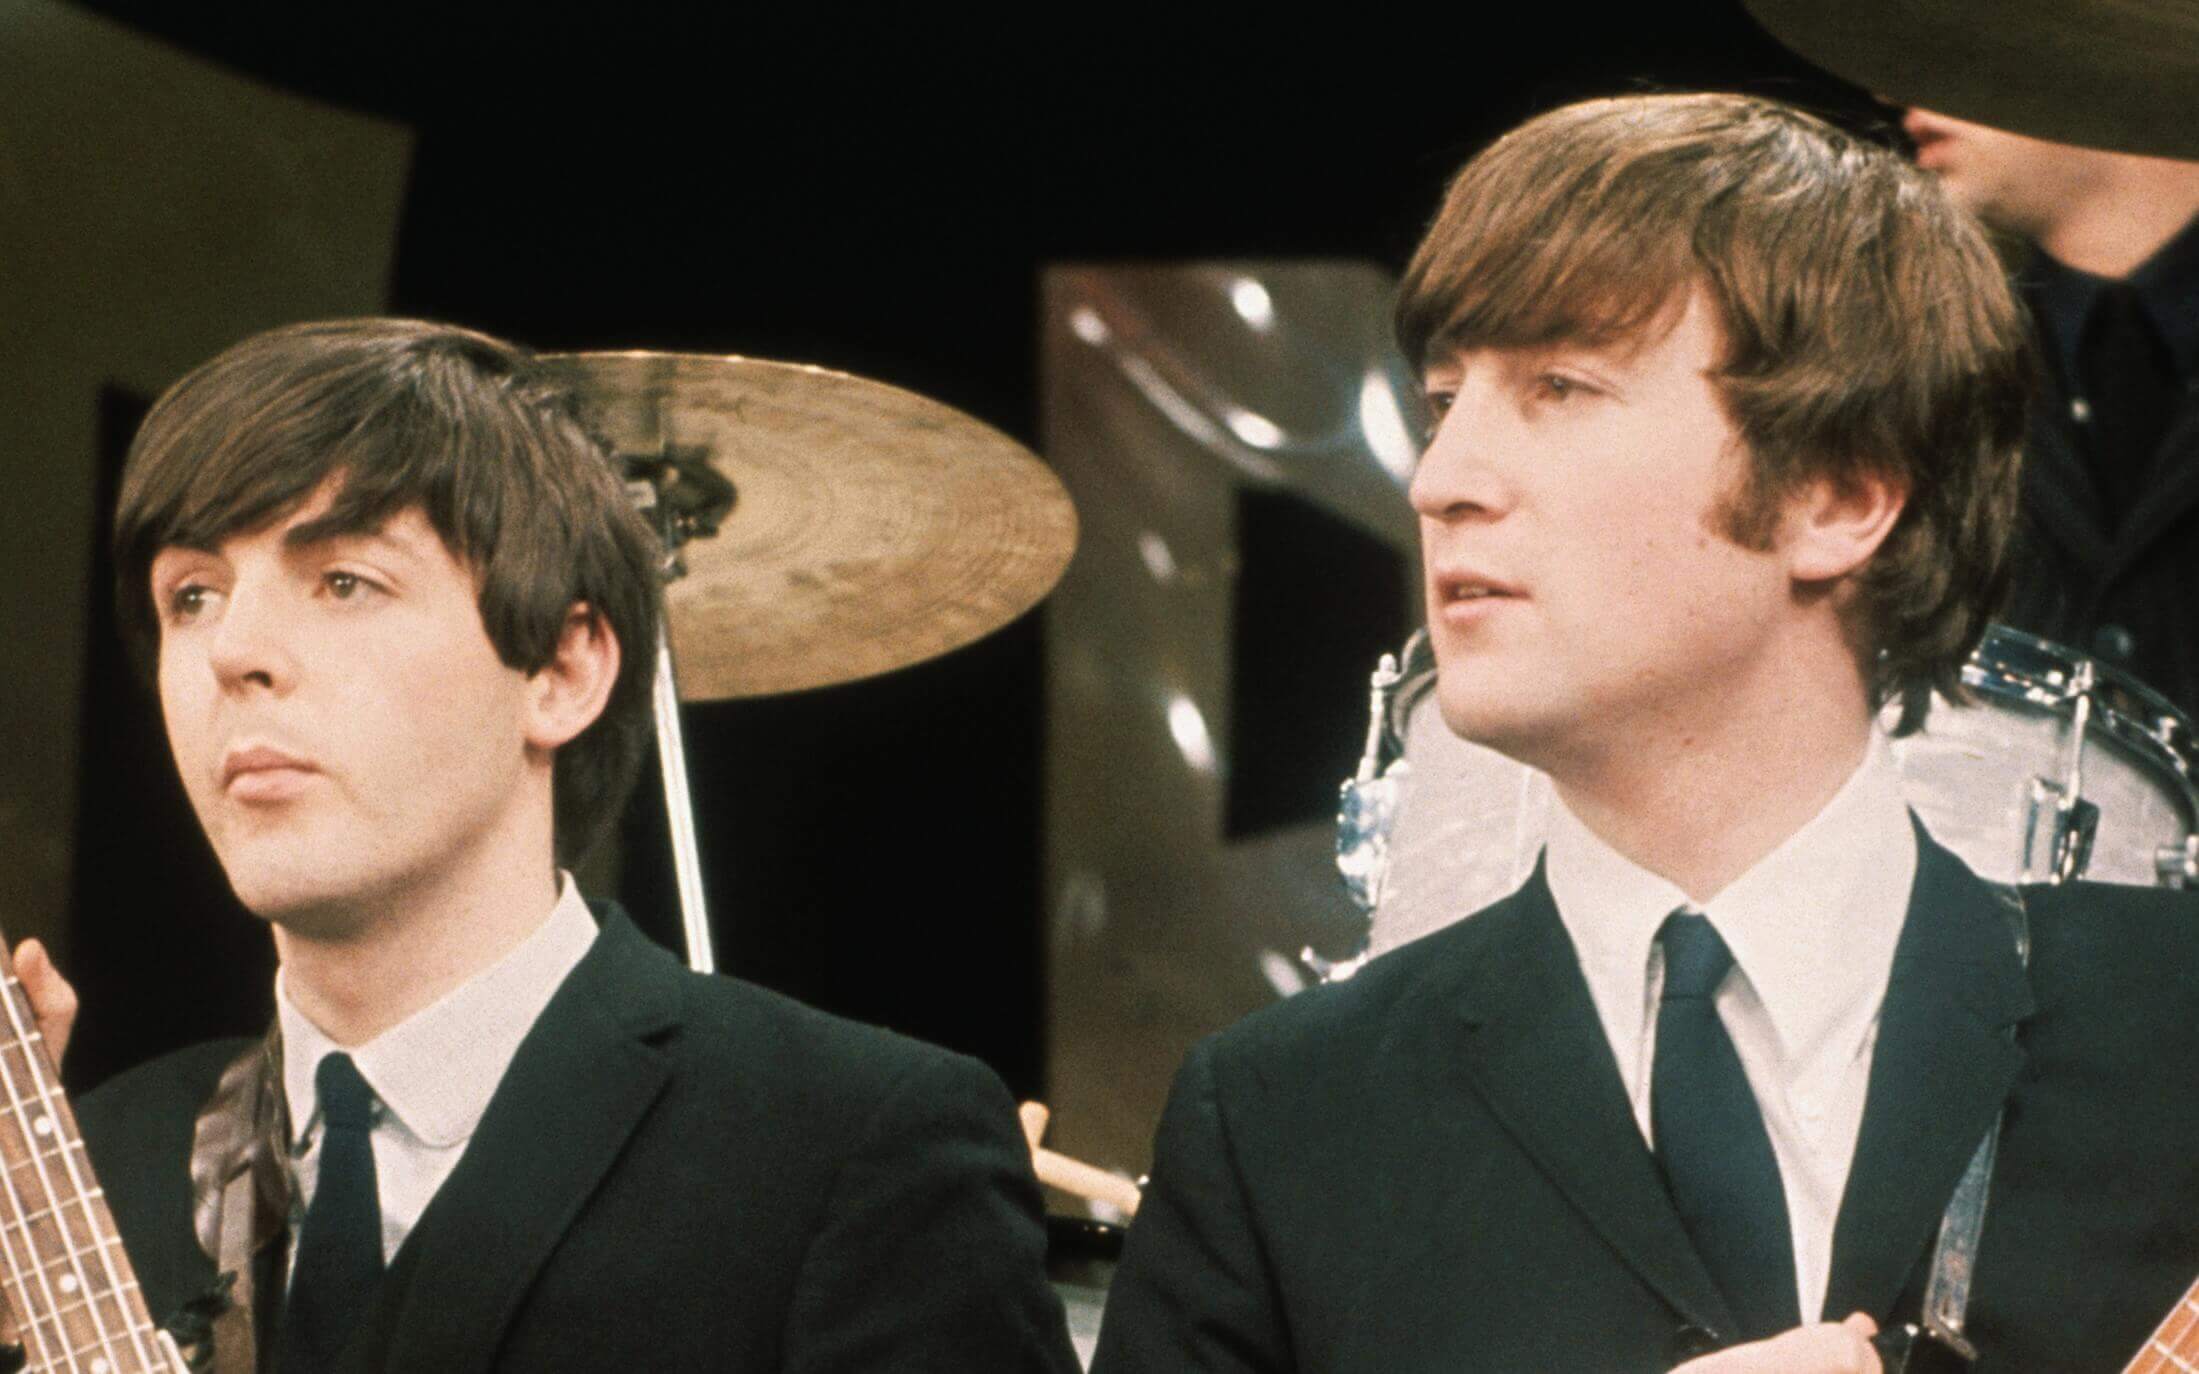 Paul McCartney and John Lennon in suits during The Beatles' "In My Life" era